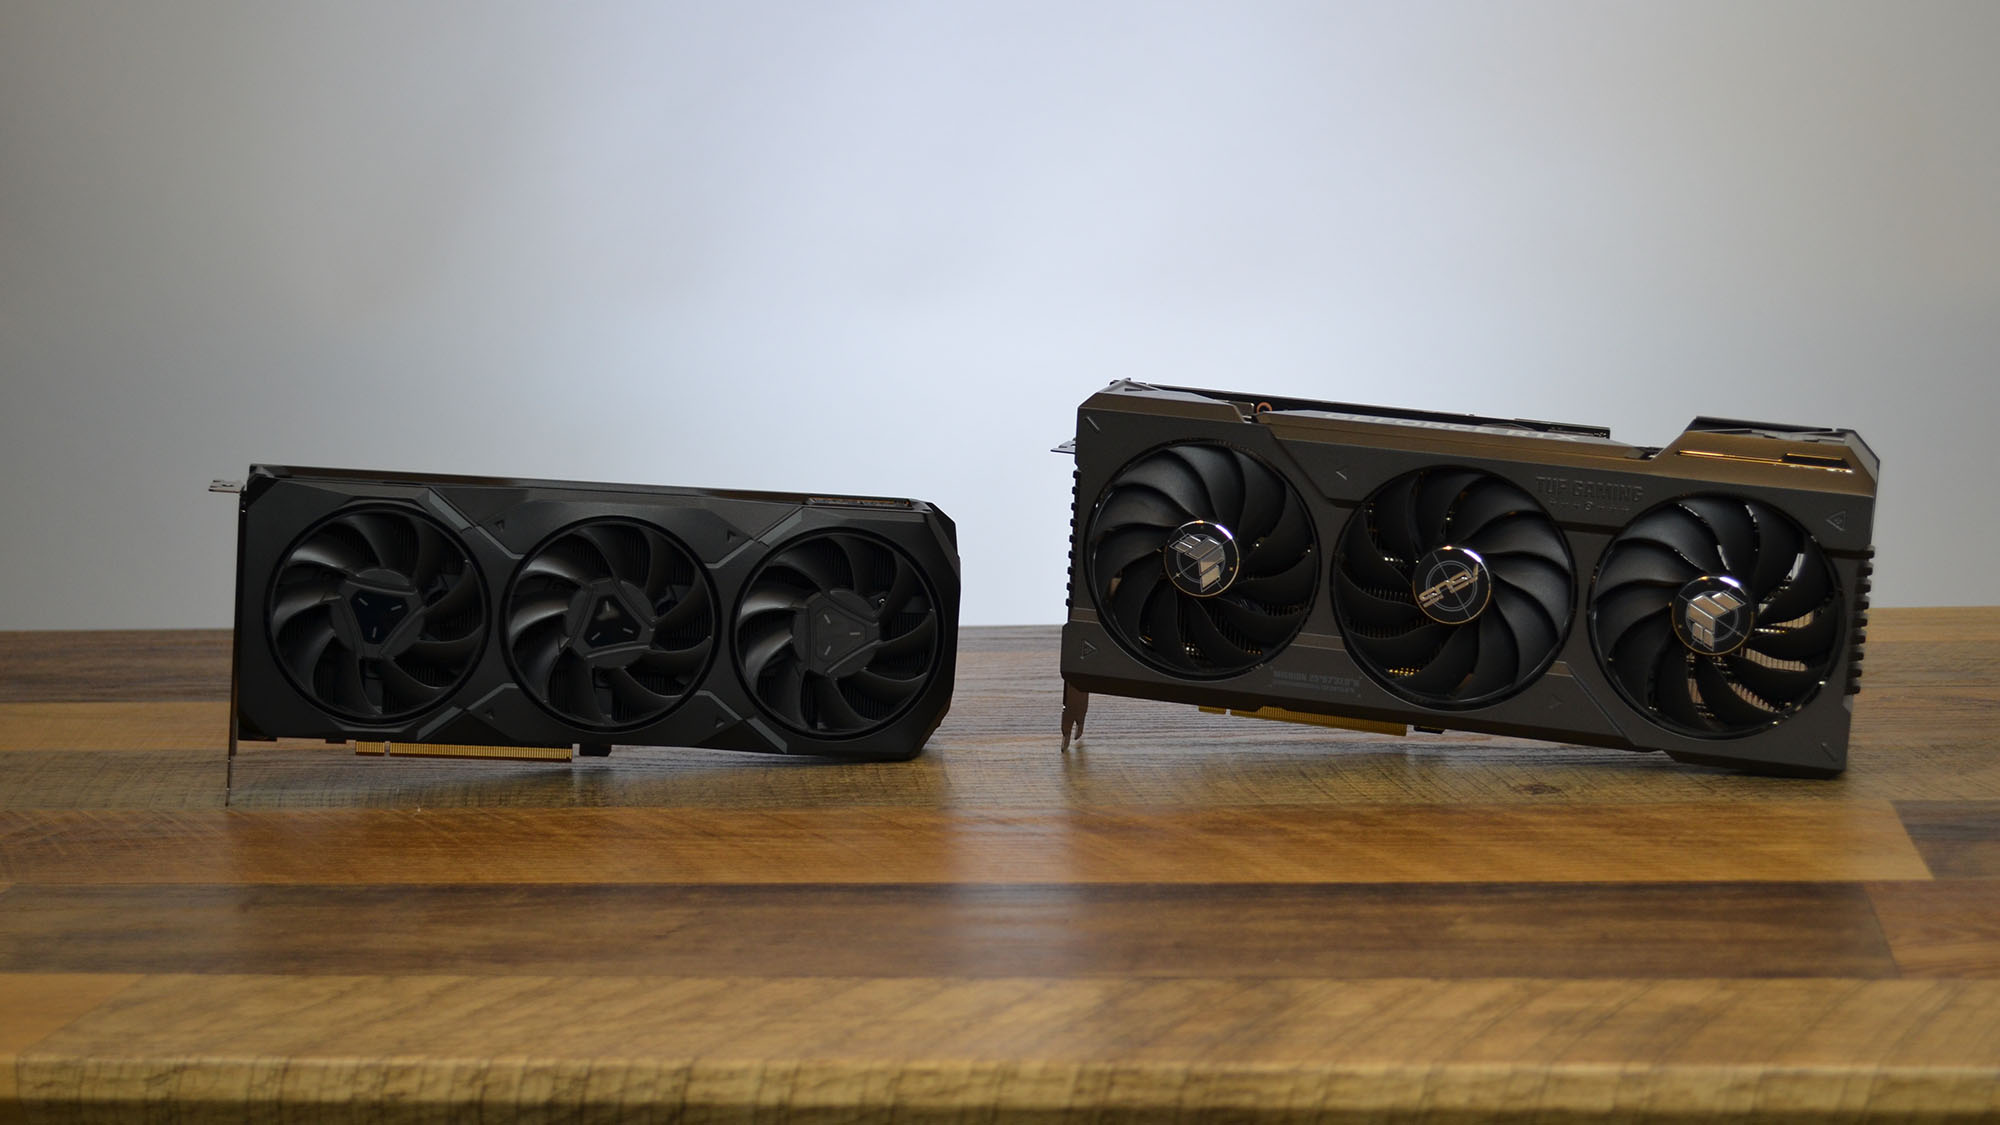 RX 6800 XT vs RTX 4070 - 1440p and 2160p Gaming Benchmarks 